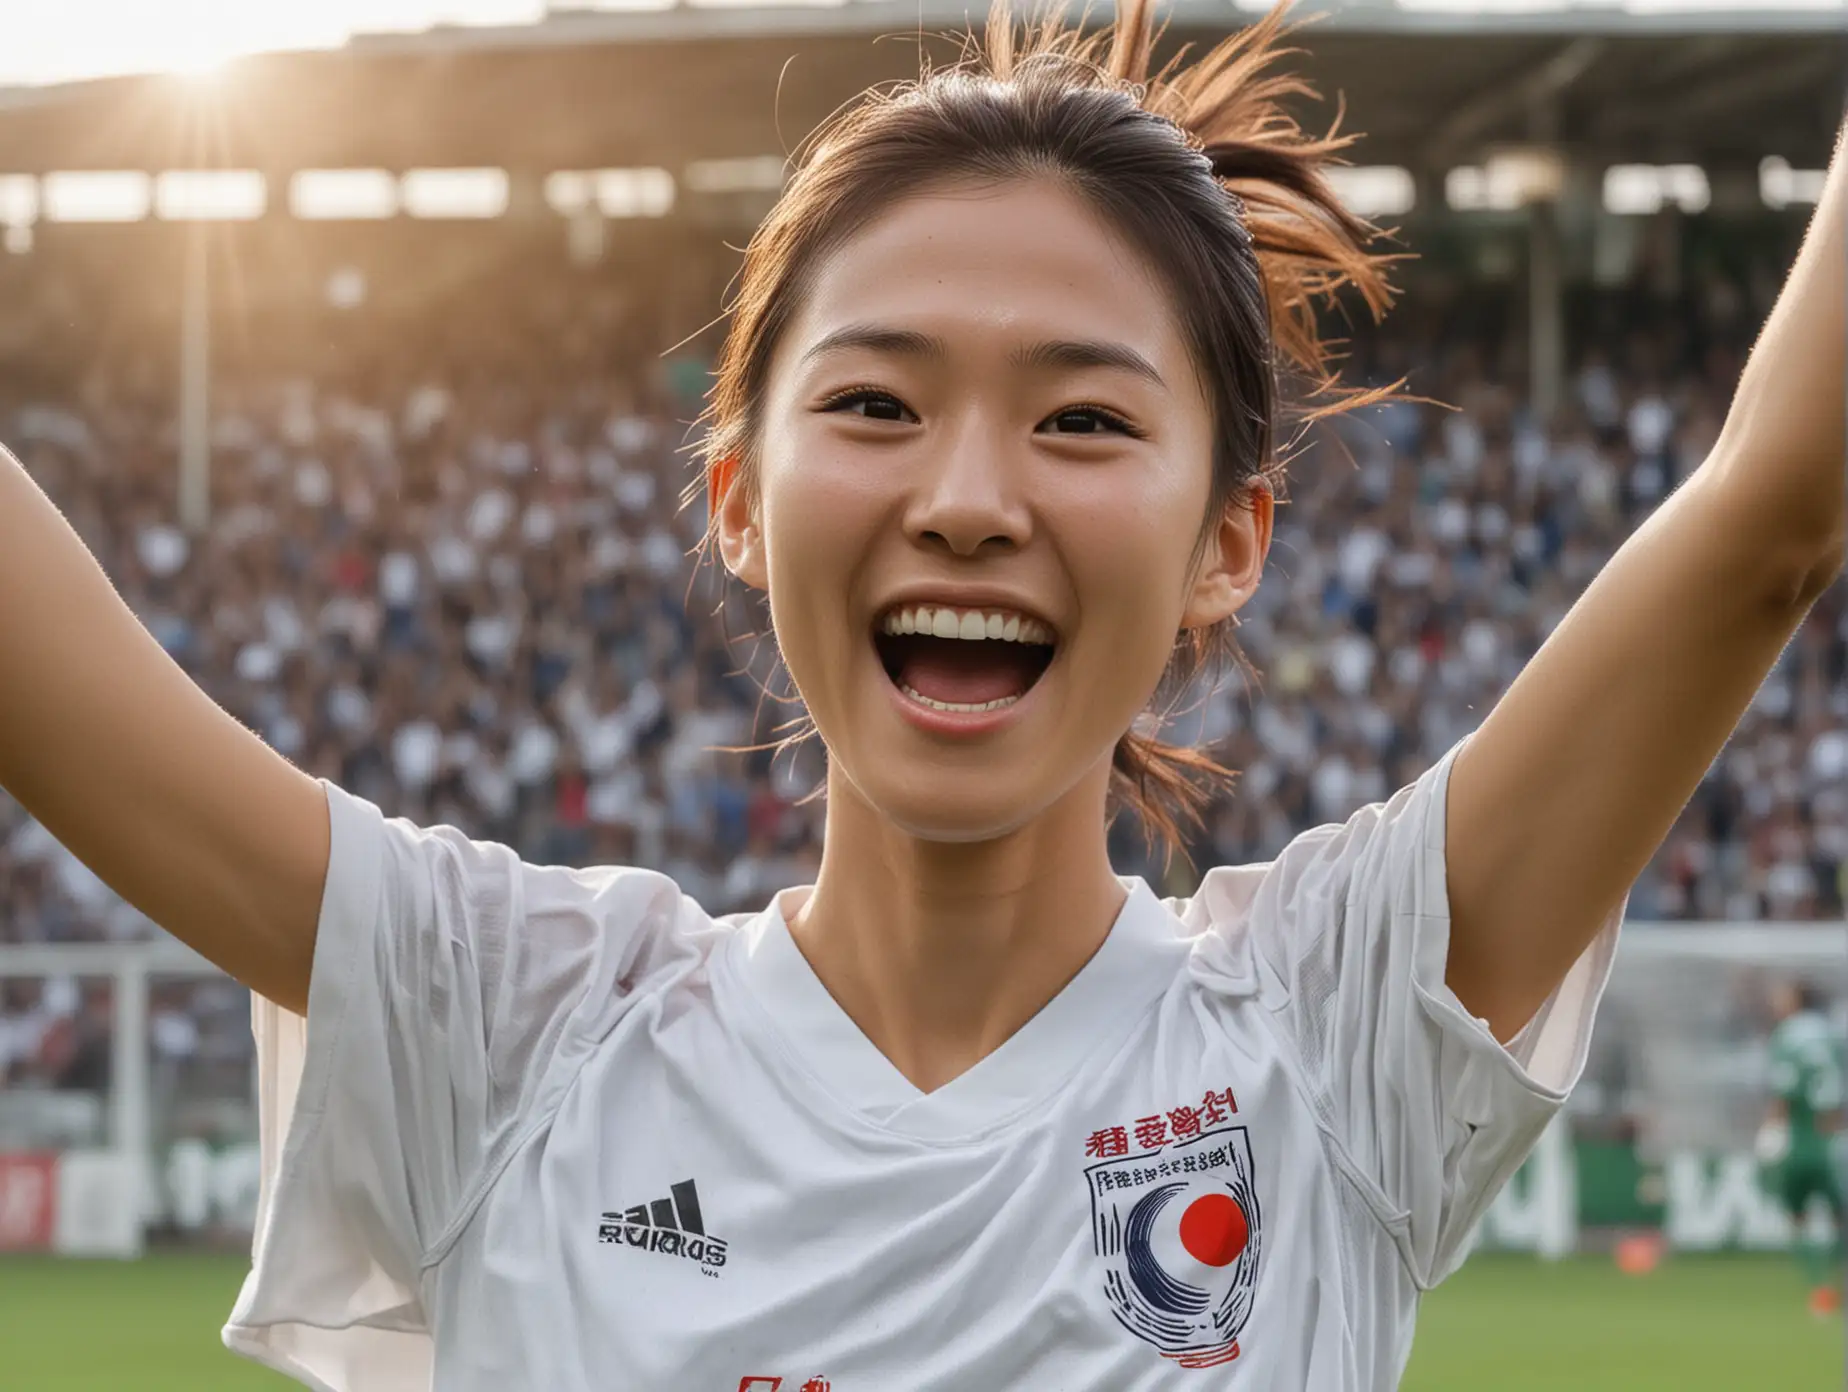 Natural face without make-up of an extremely beautiful skinny soccer girl from japan overflowing with triumphant joy, moments after a glorious goal.